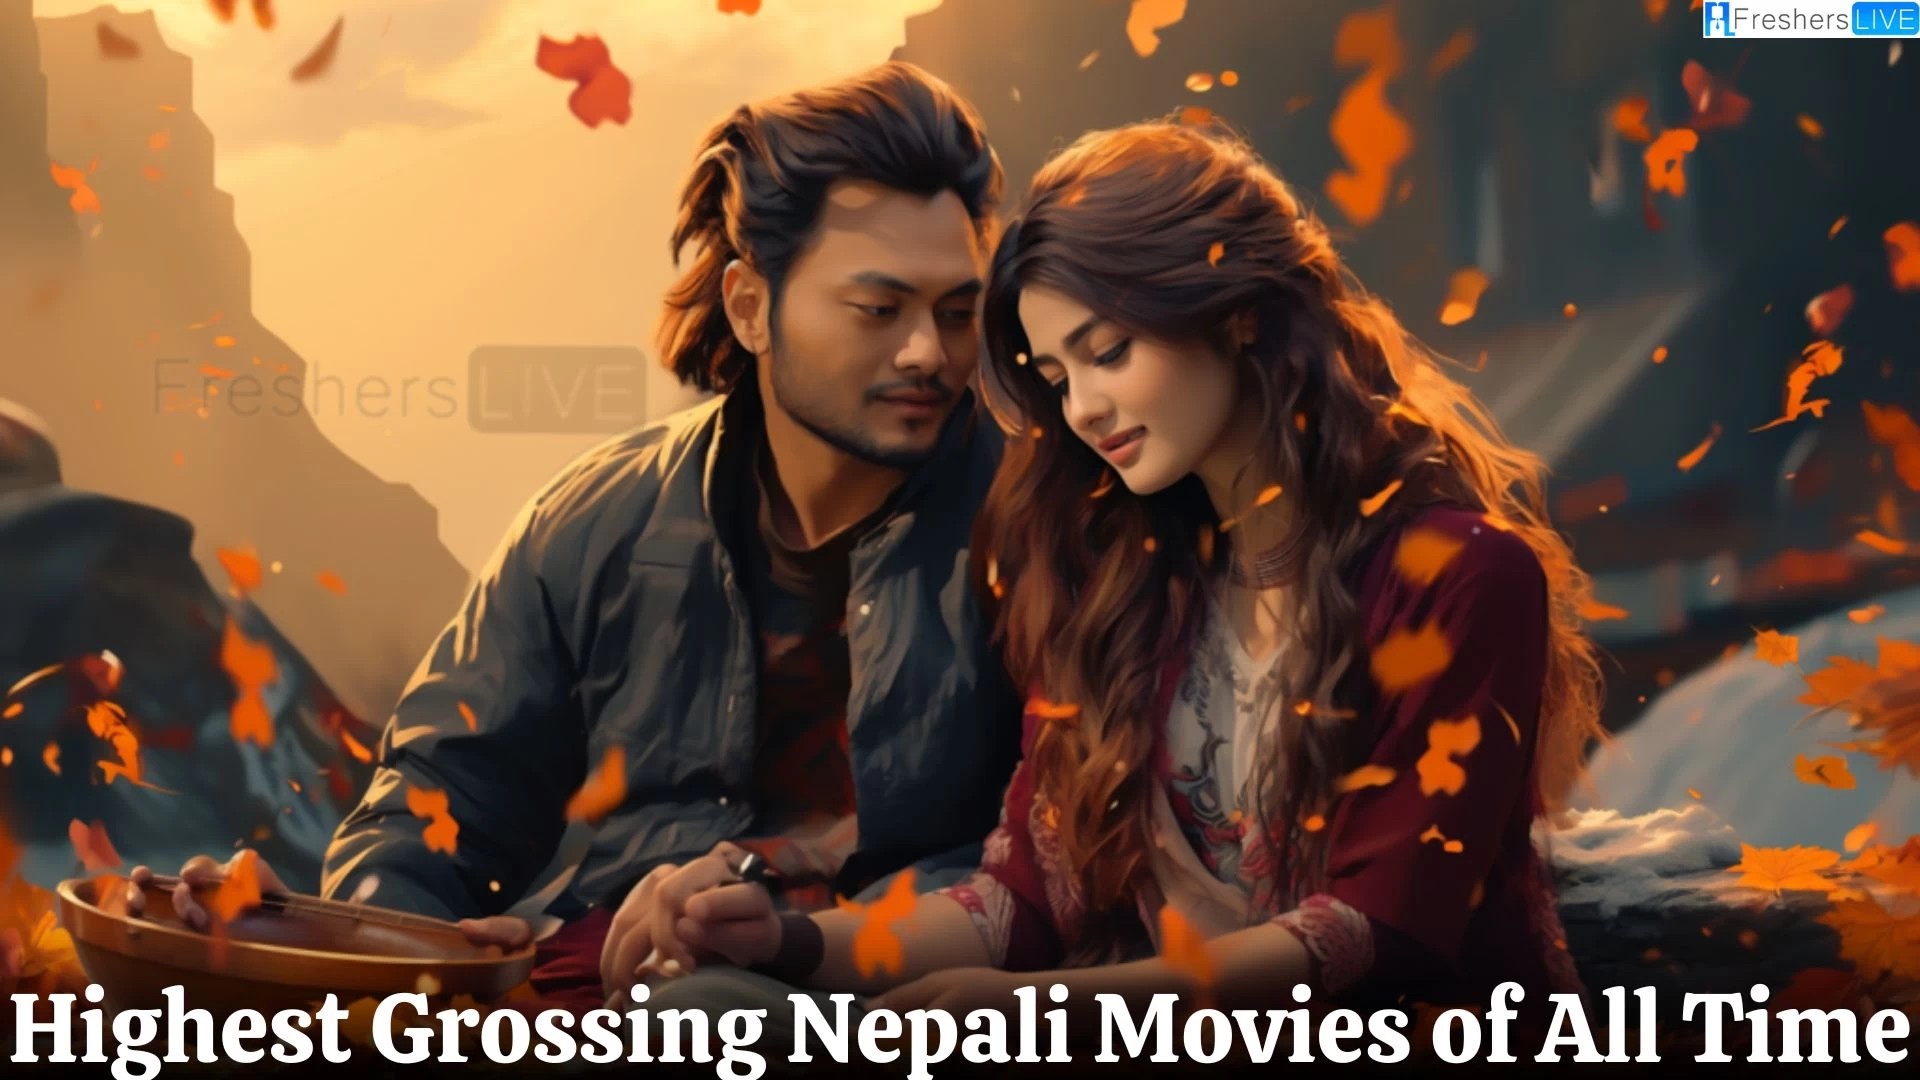 Highest Grossing Nepali Movies of All Time - Top 10 Box Office Titans